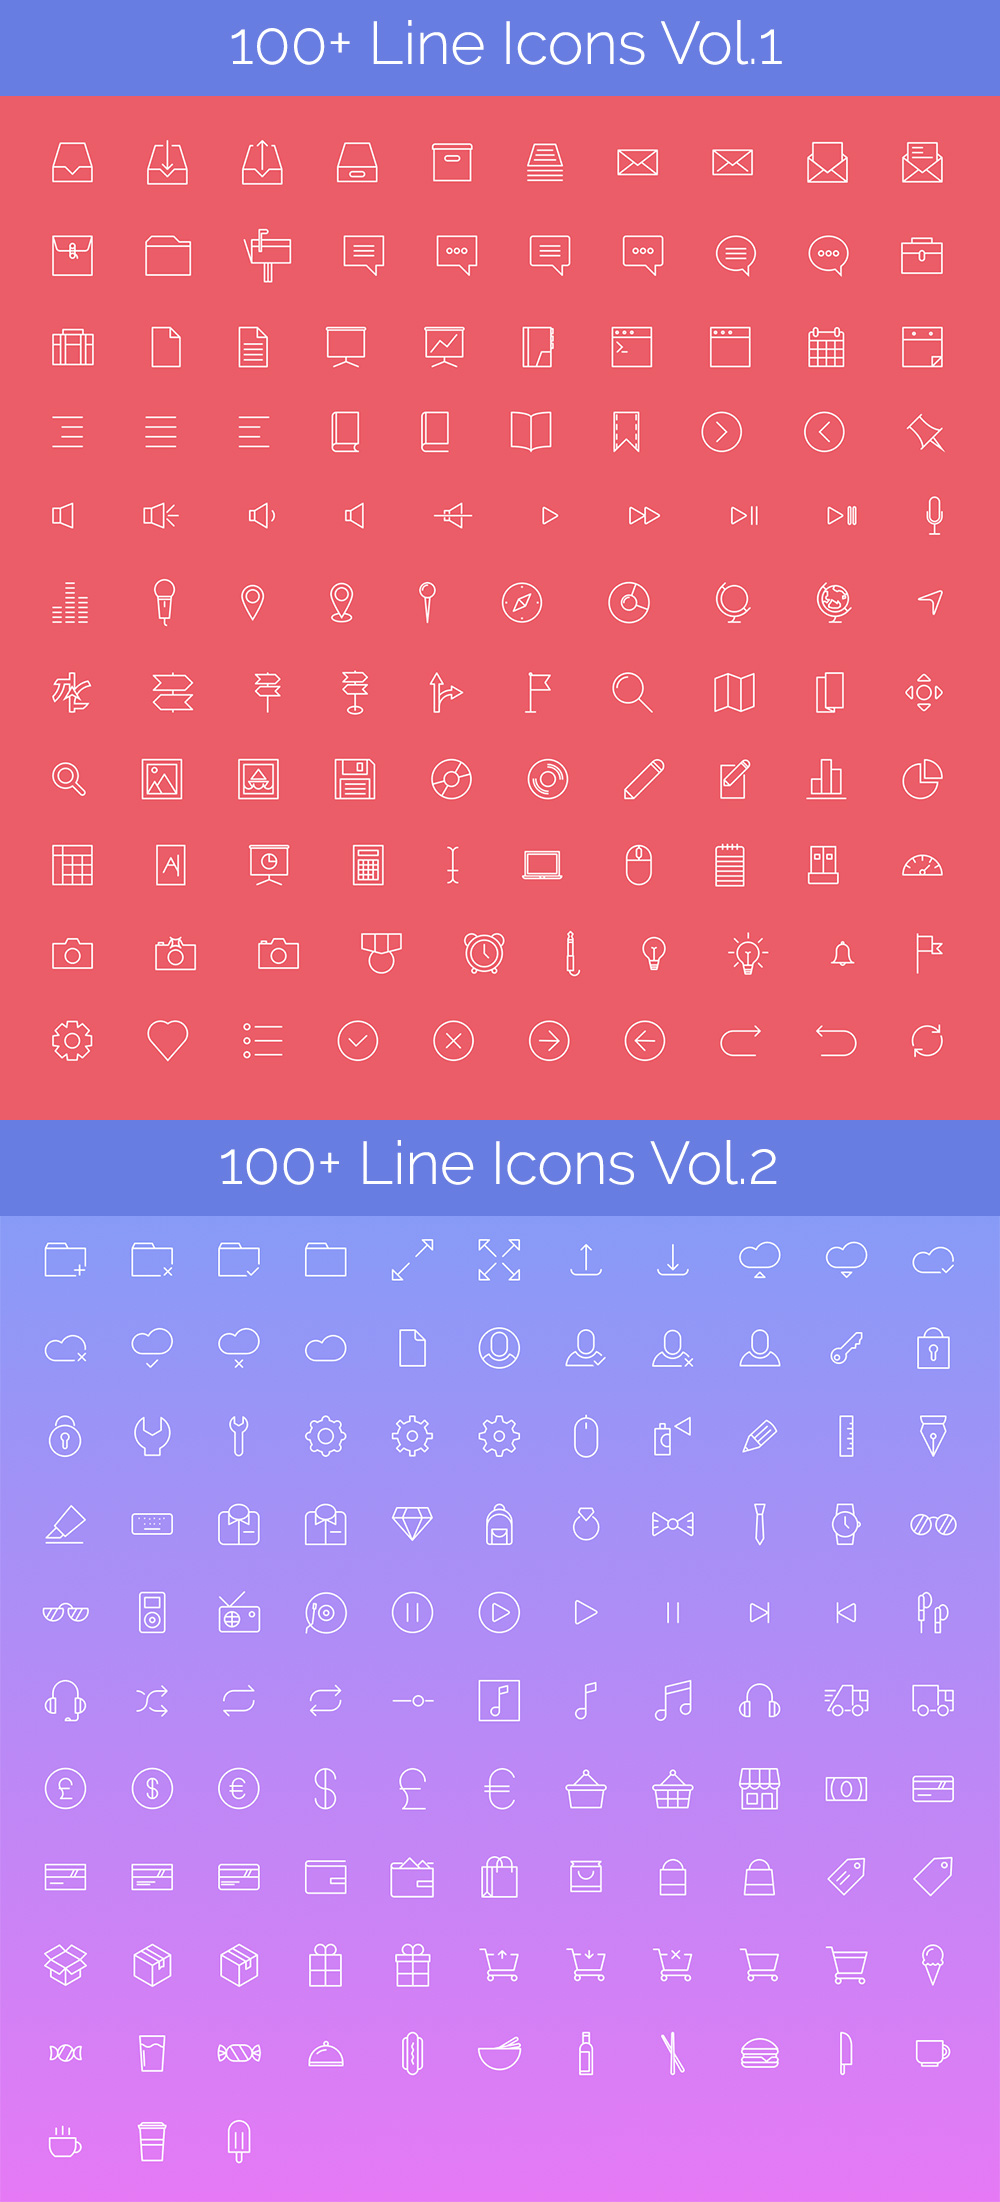 Simple_line_icons_full_view